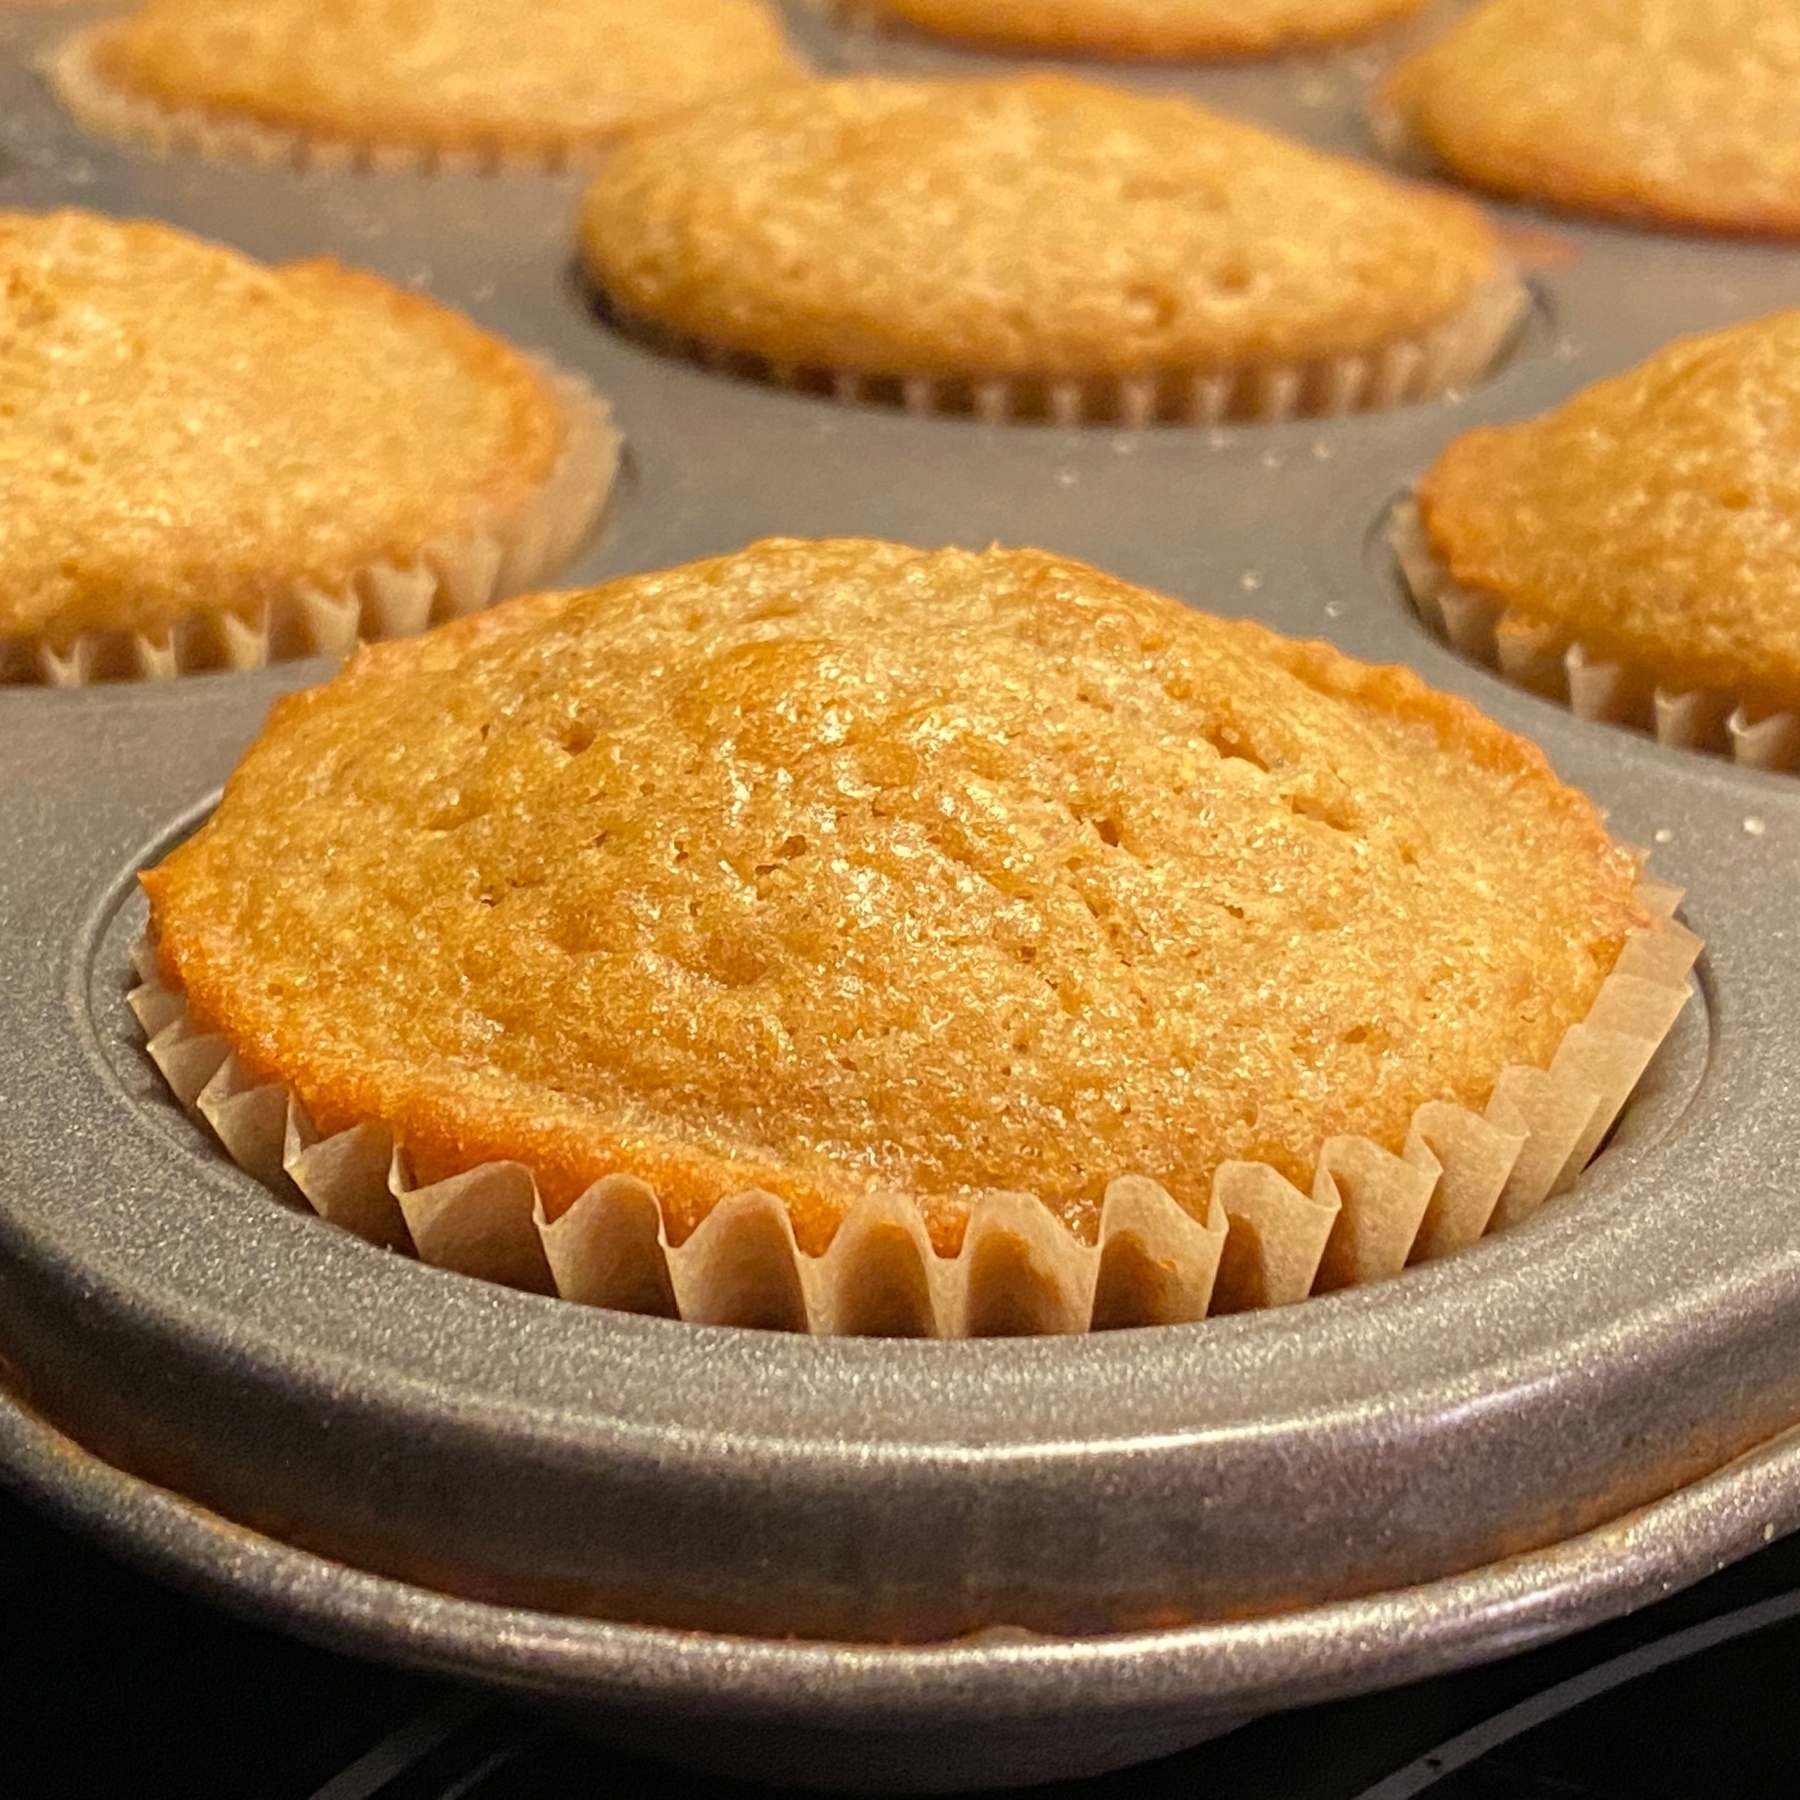 Muffins in pan.